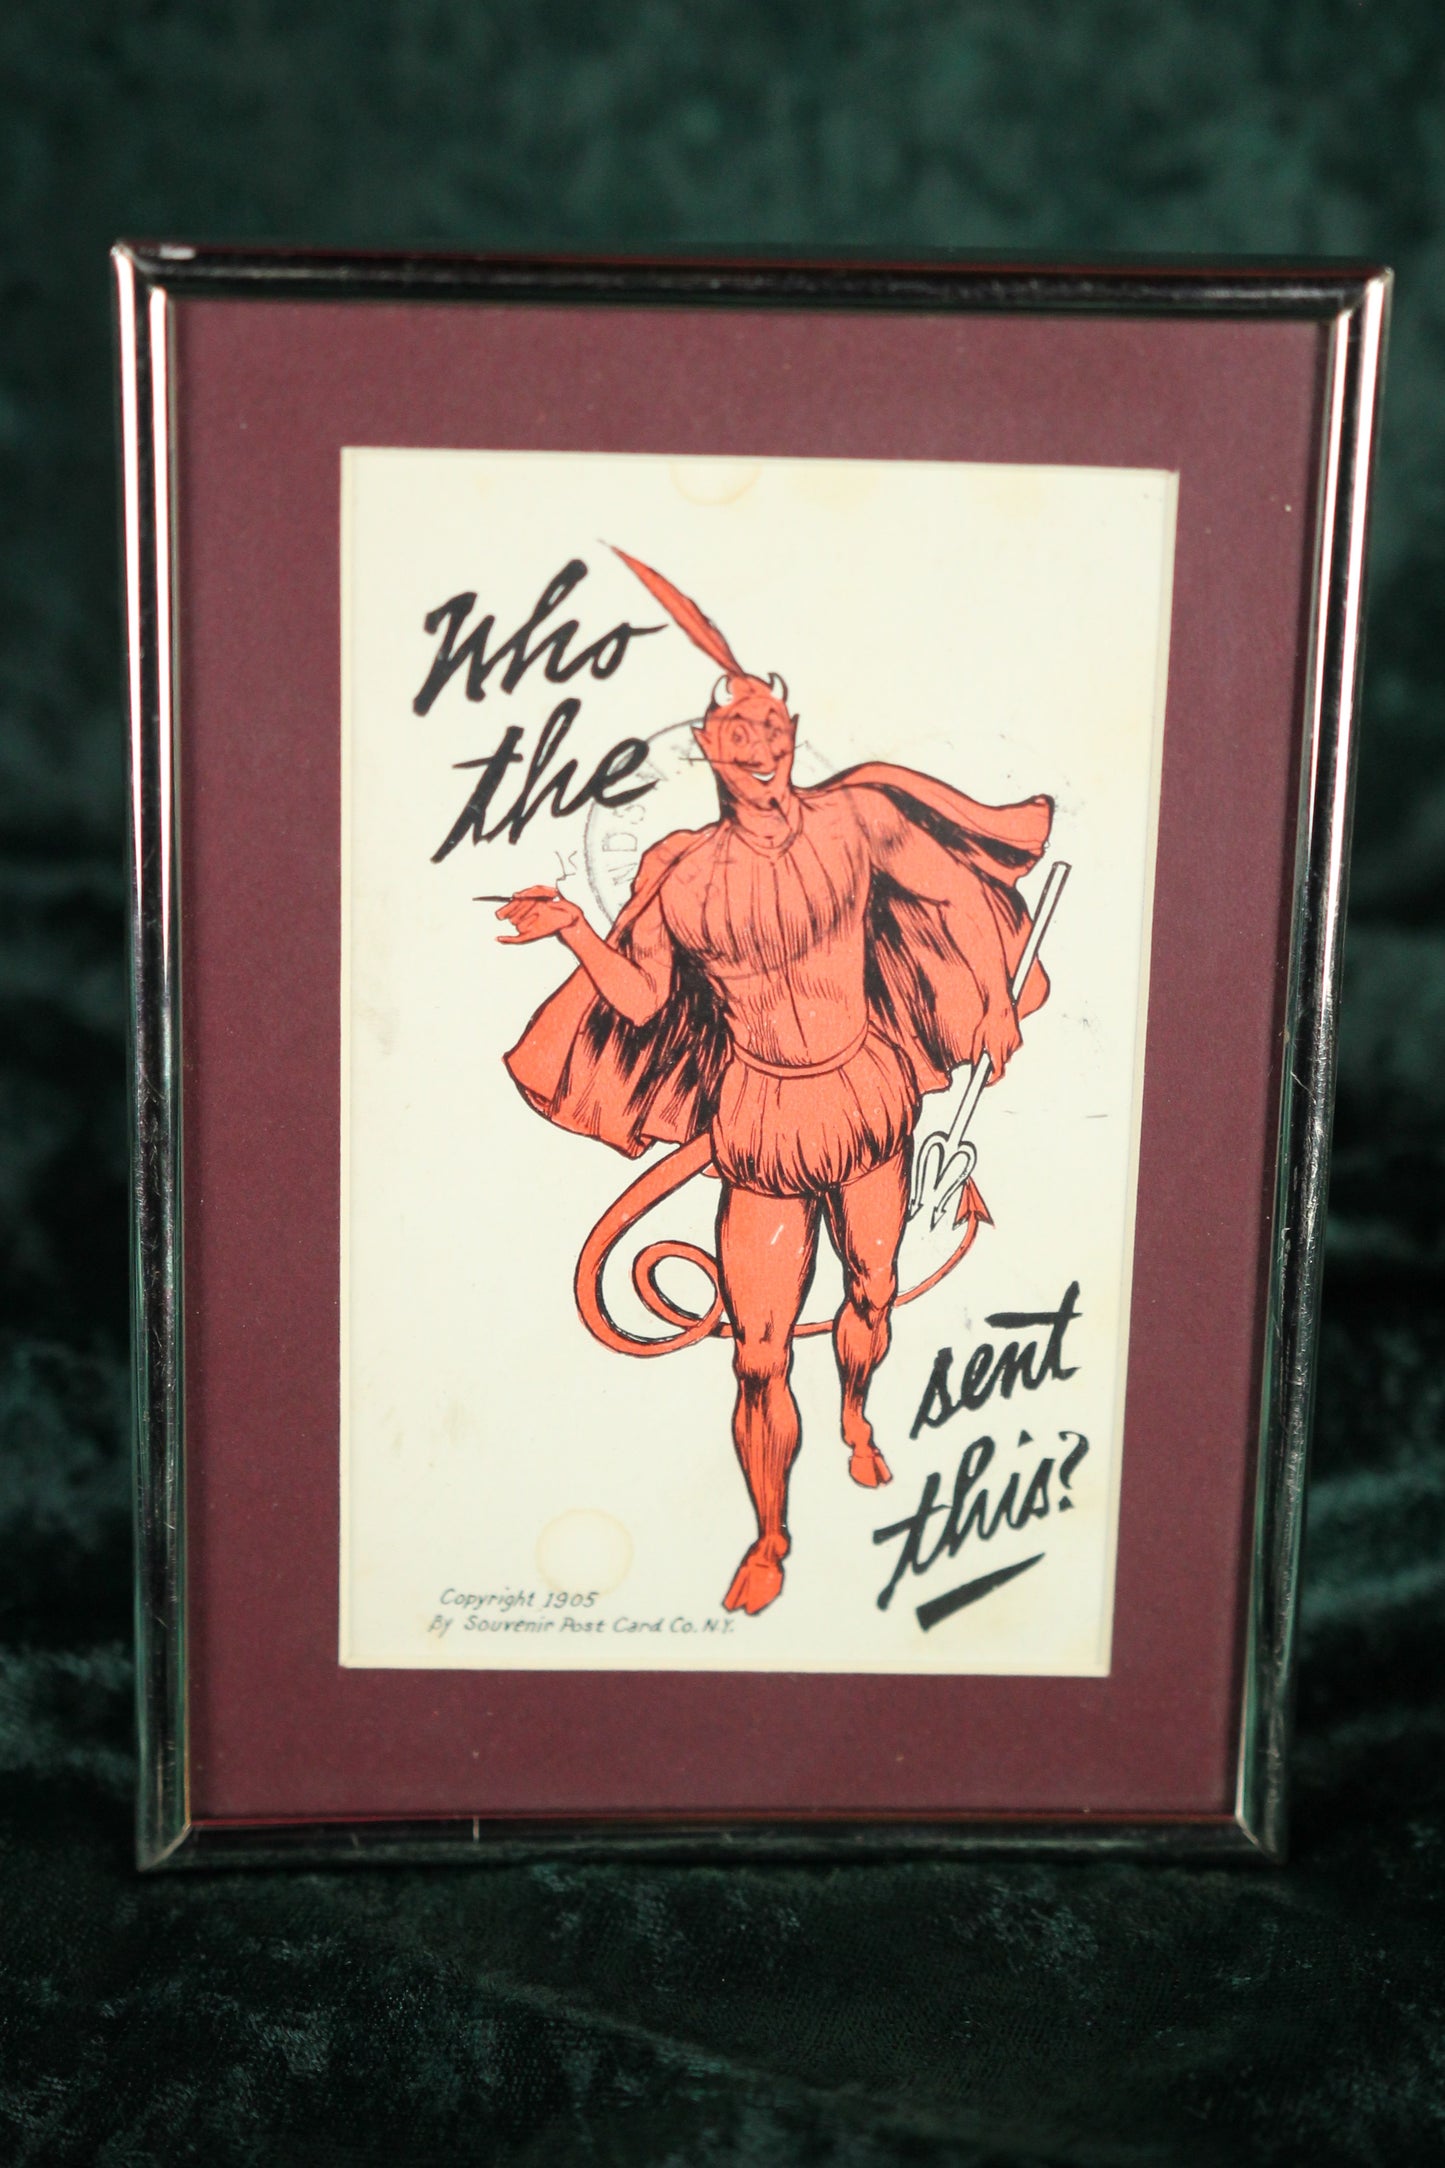 Framed Antique 1905 "Who the Devil Sent This?" Postcard by Souvenir Postcard Co, NY